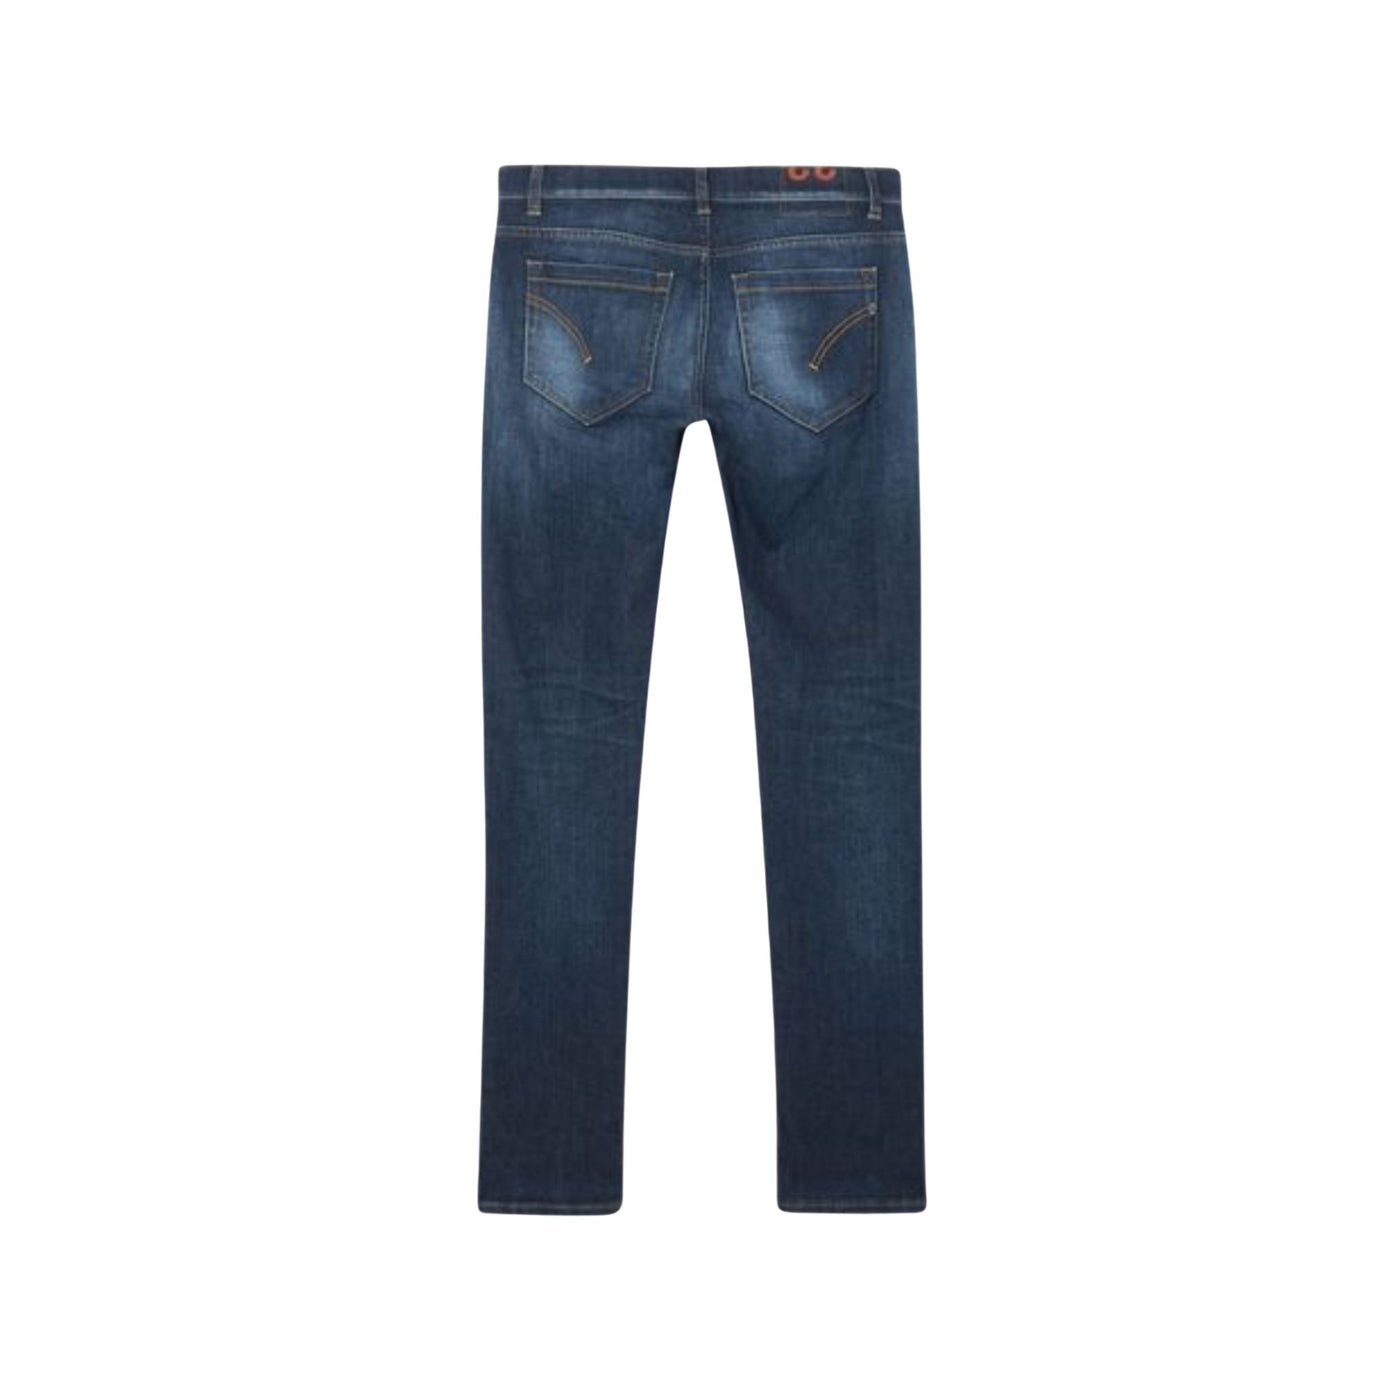 Men's jeans with faded effect on the front